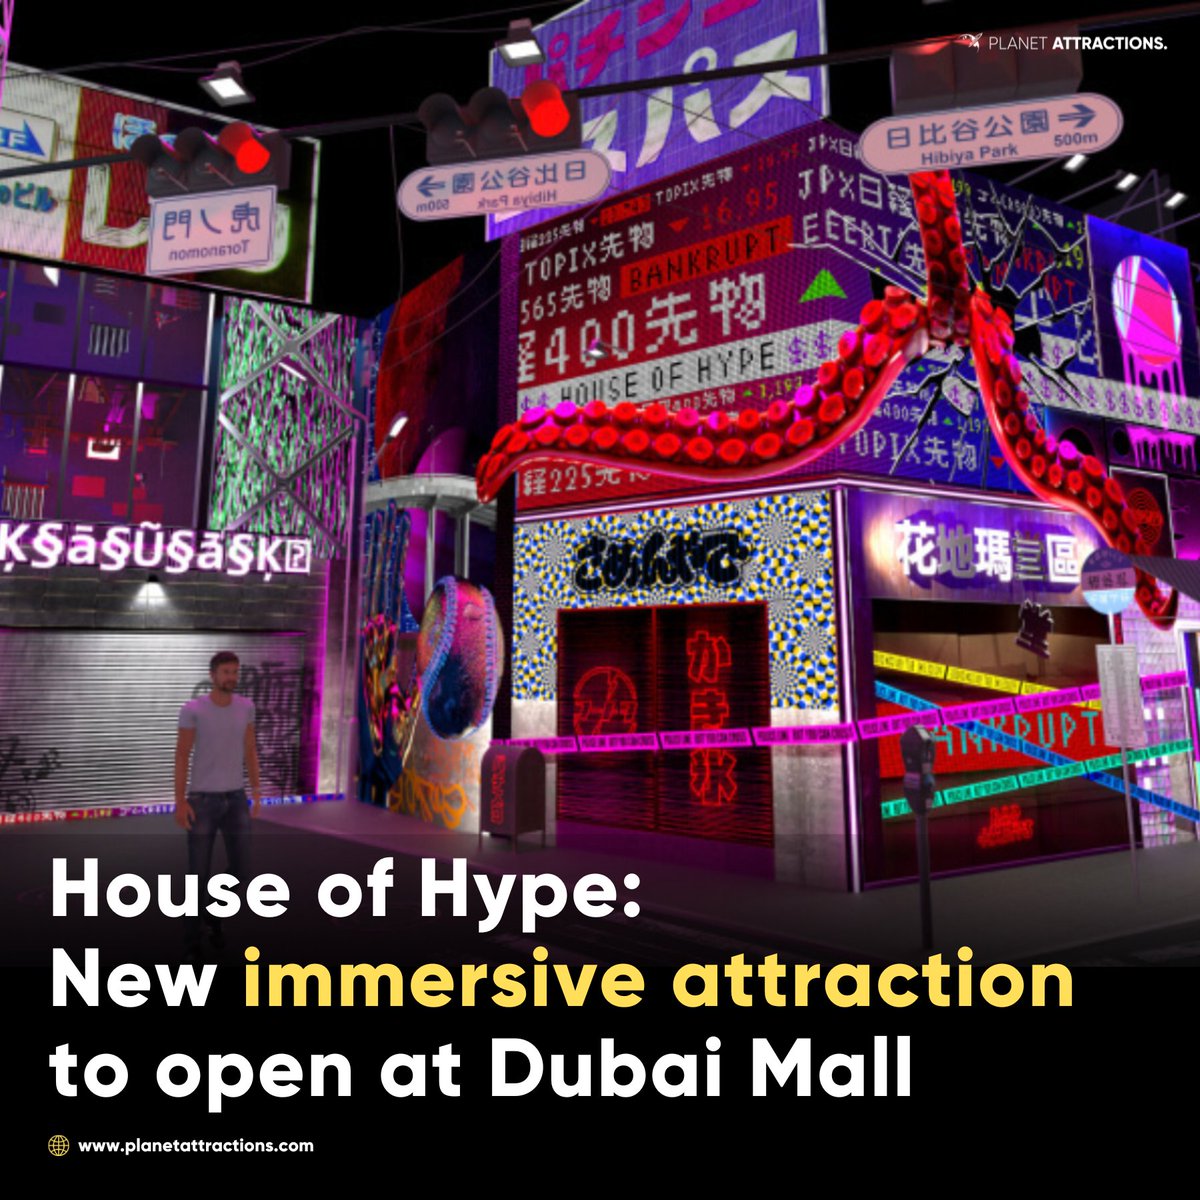 A new immersive experiential destination is set to open at the Dubai Mall later this year. tinyurl.com/2ye54nk4

@TheDubaiMall | #HyperSpace | #HouseOfHype | #ImmersiveExperiences